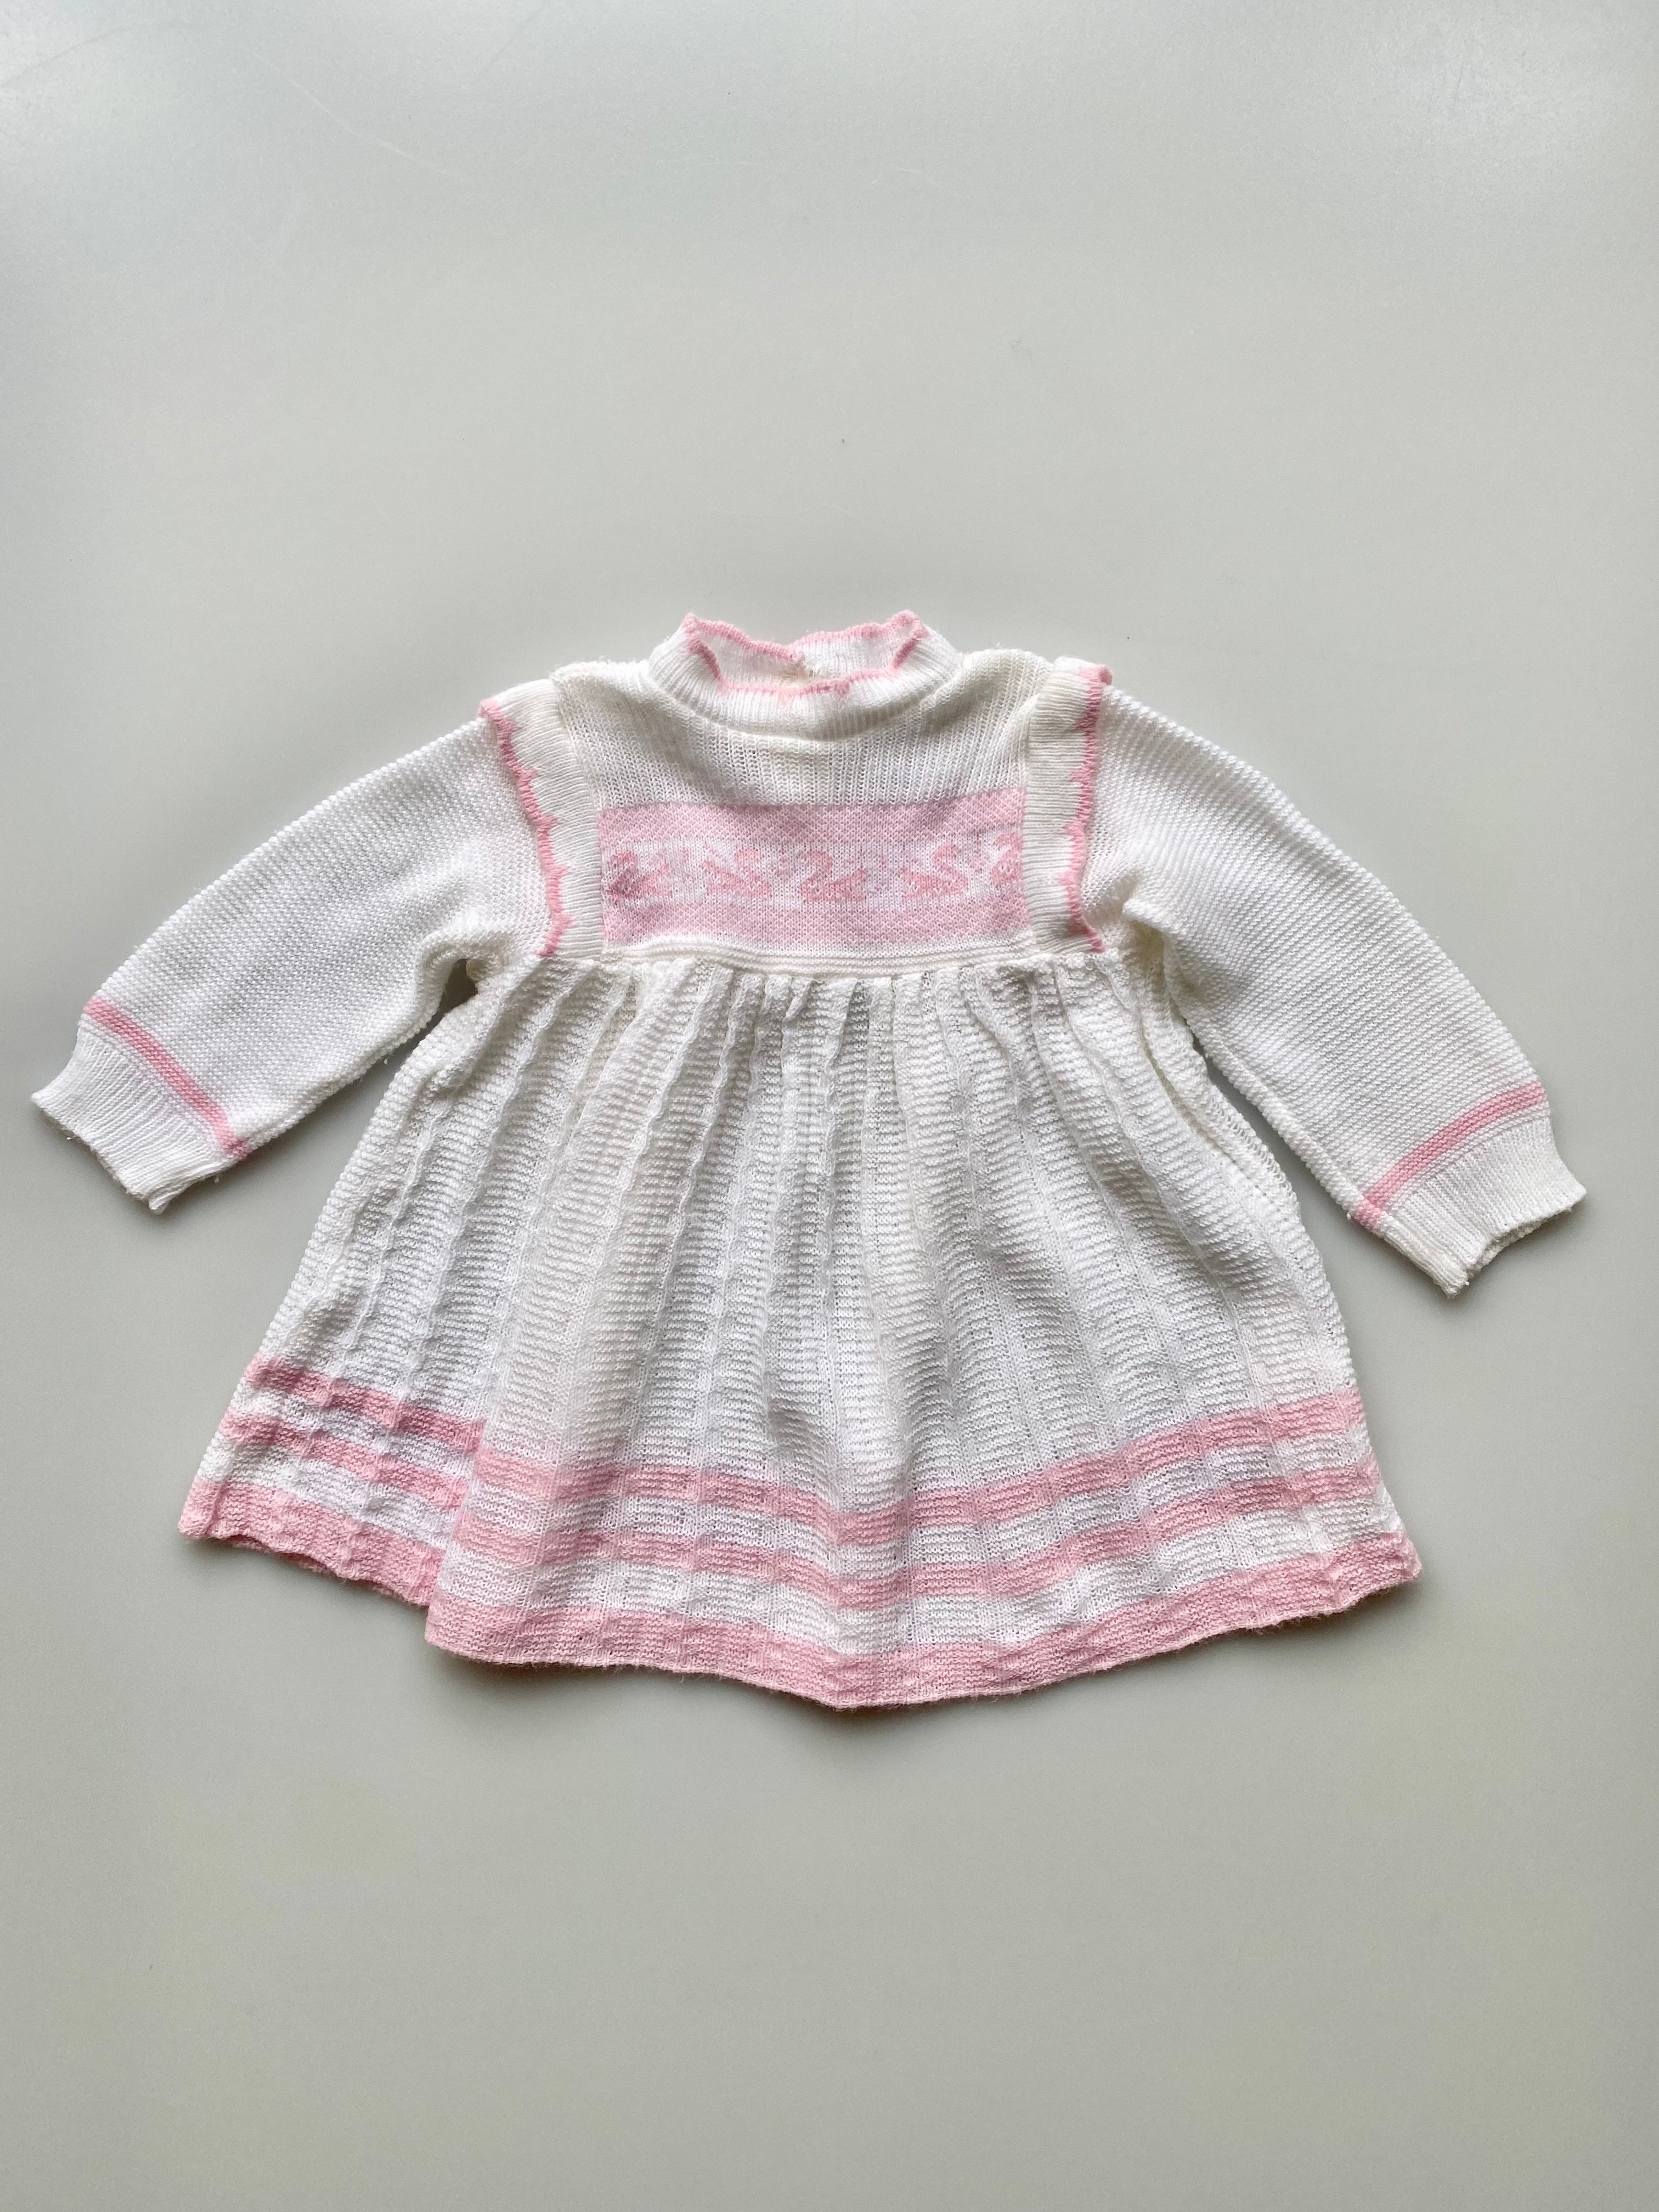 Vintage Knitted Swan Dress 3-6 Months